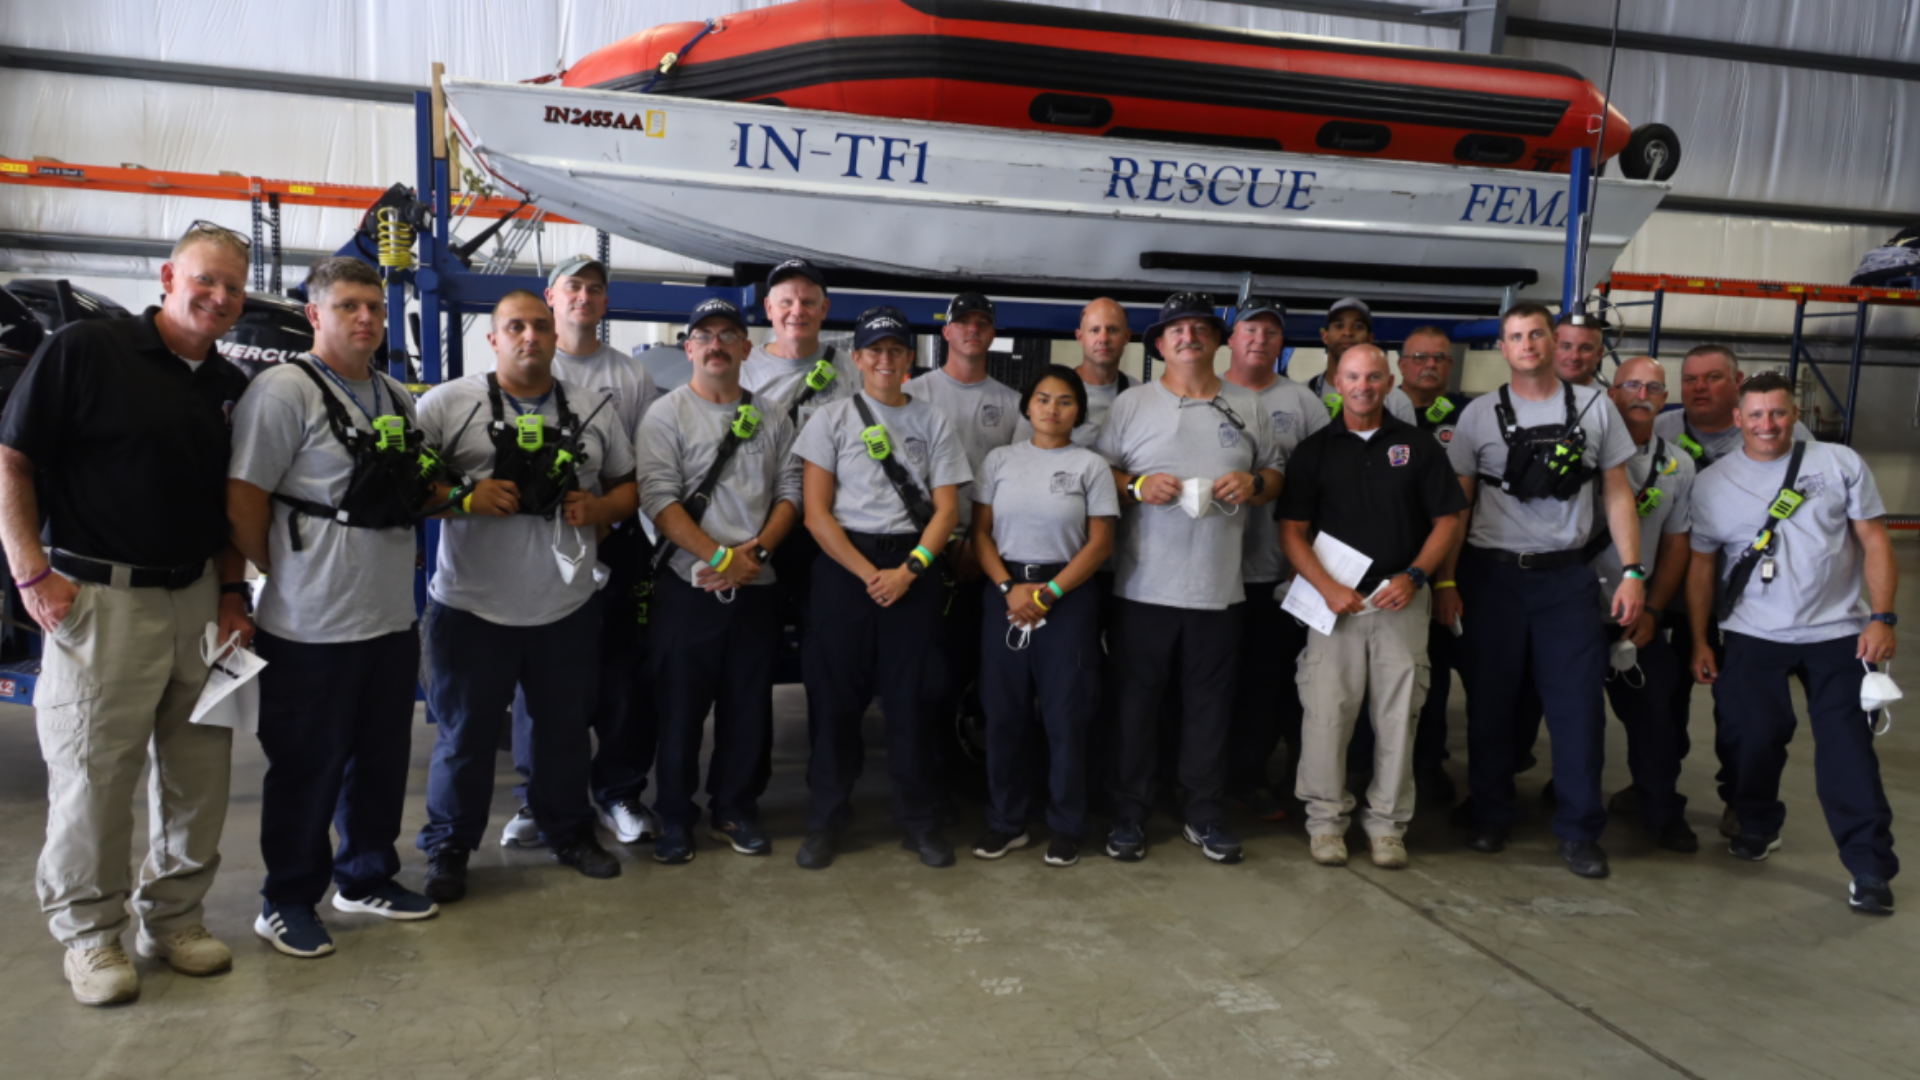 Forty-five members of Task Force 1 were deployed to Louisiana on Friday, Aug. 27, to act as an urban search and rescue team.